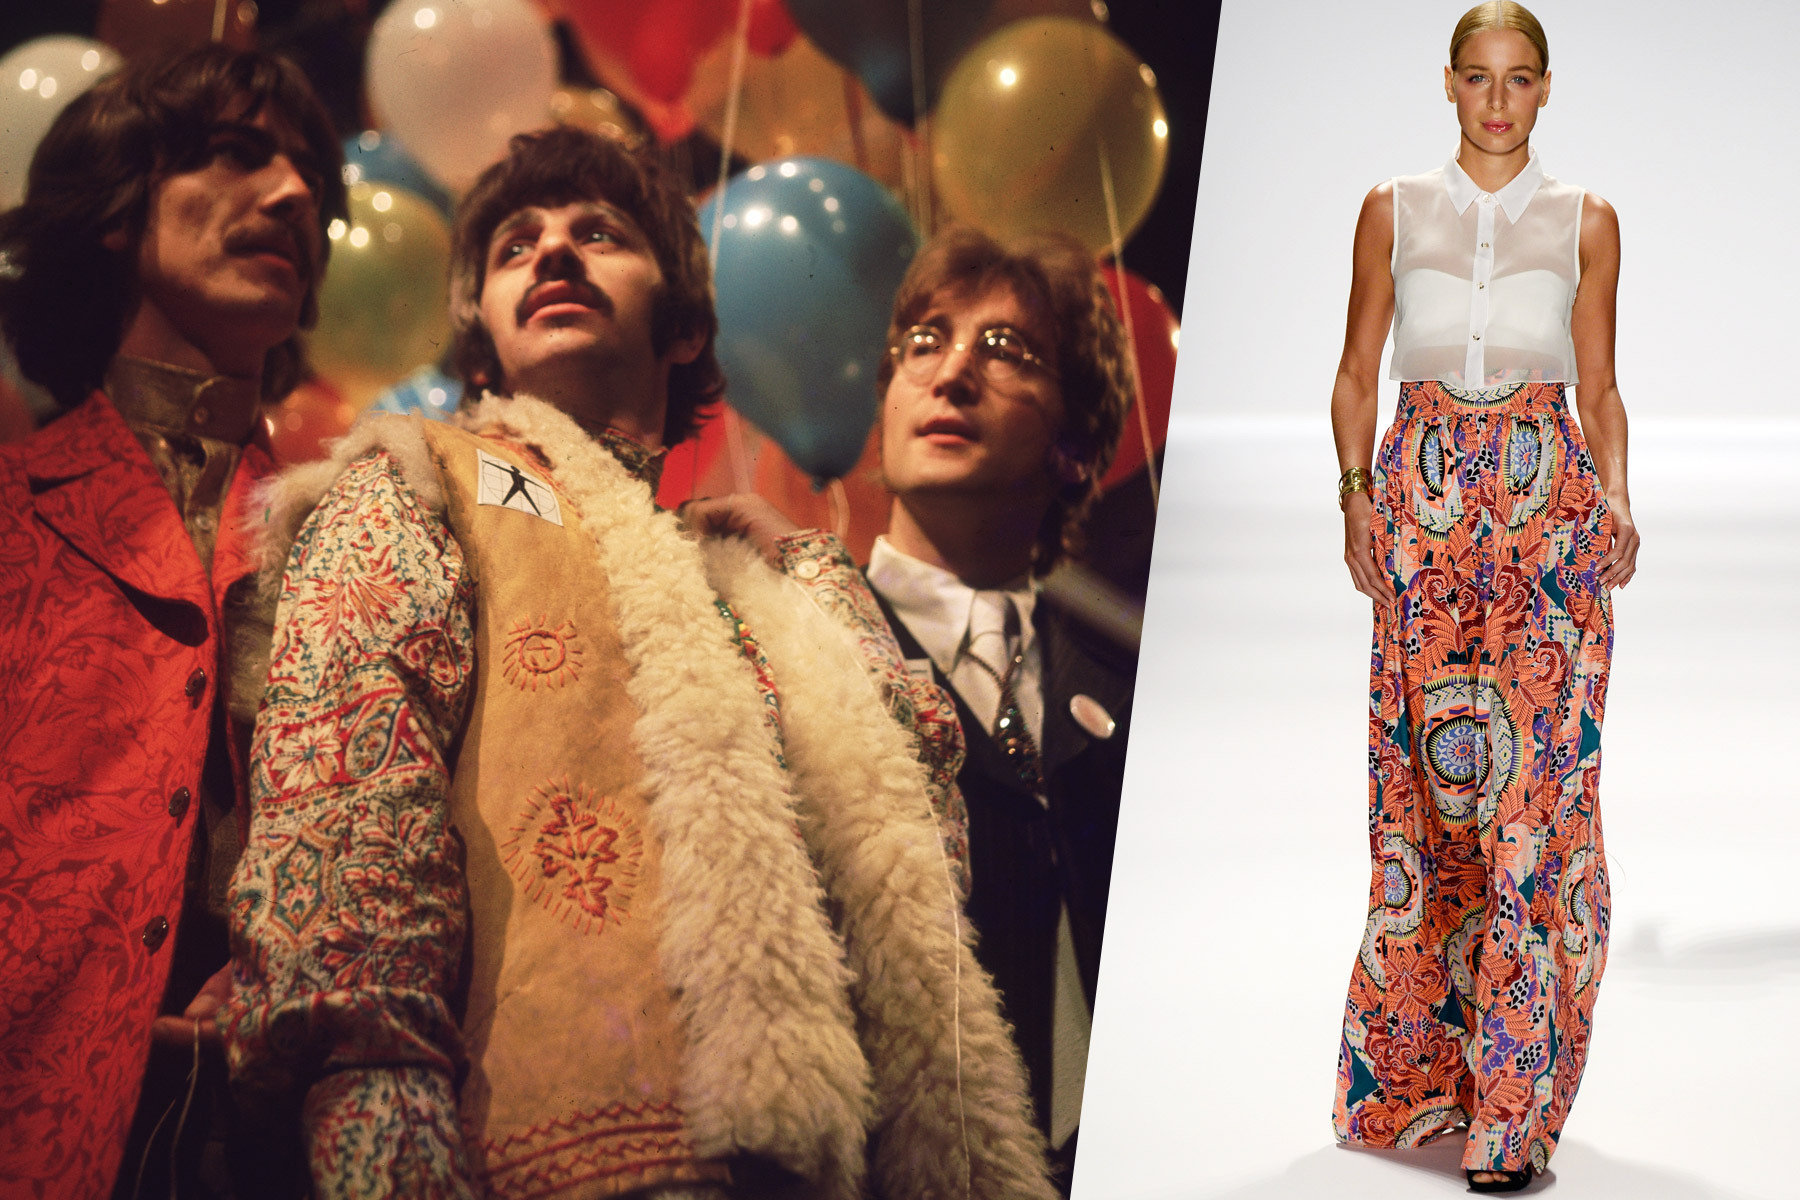 The Beatles ready for the 1968 world tour with a paisley clad model from Mara Hoffman